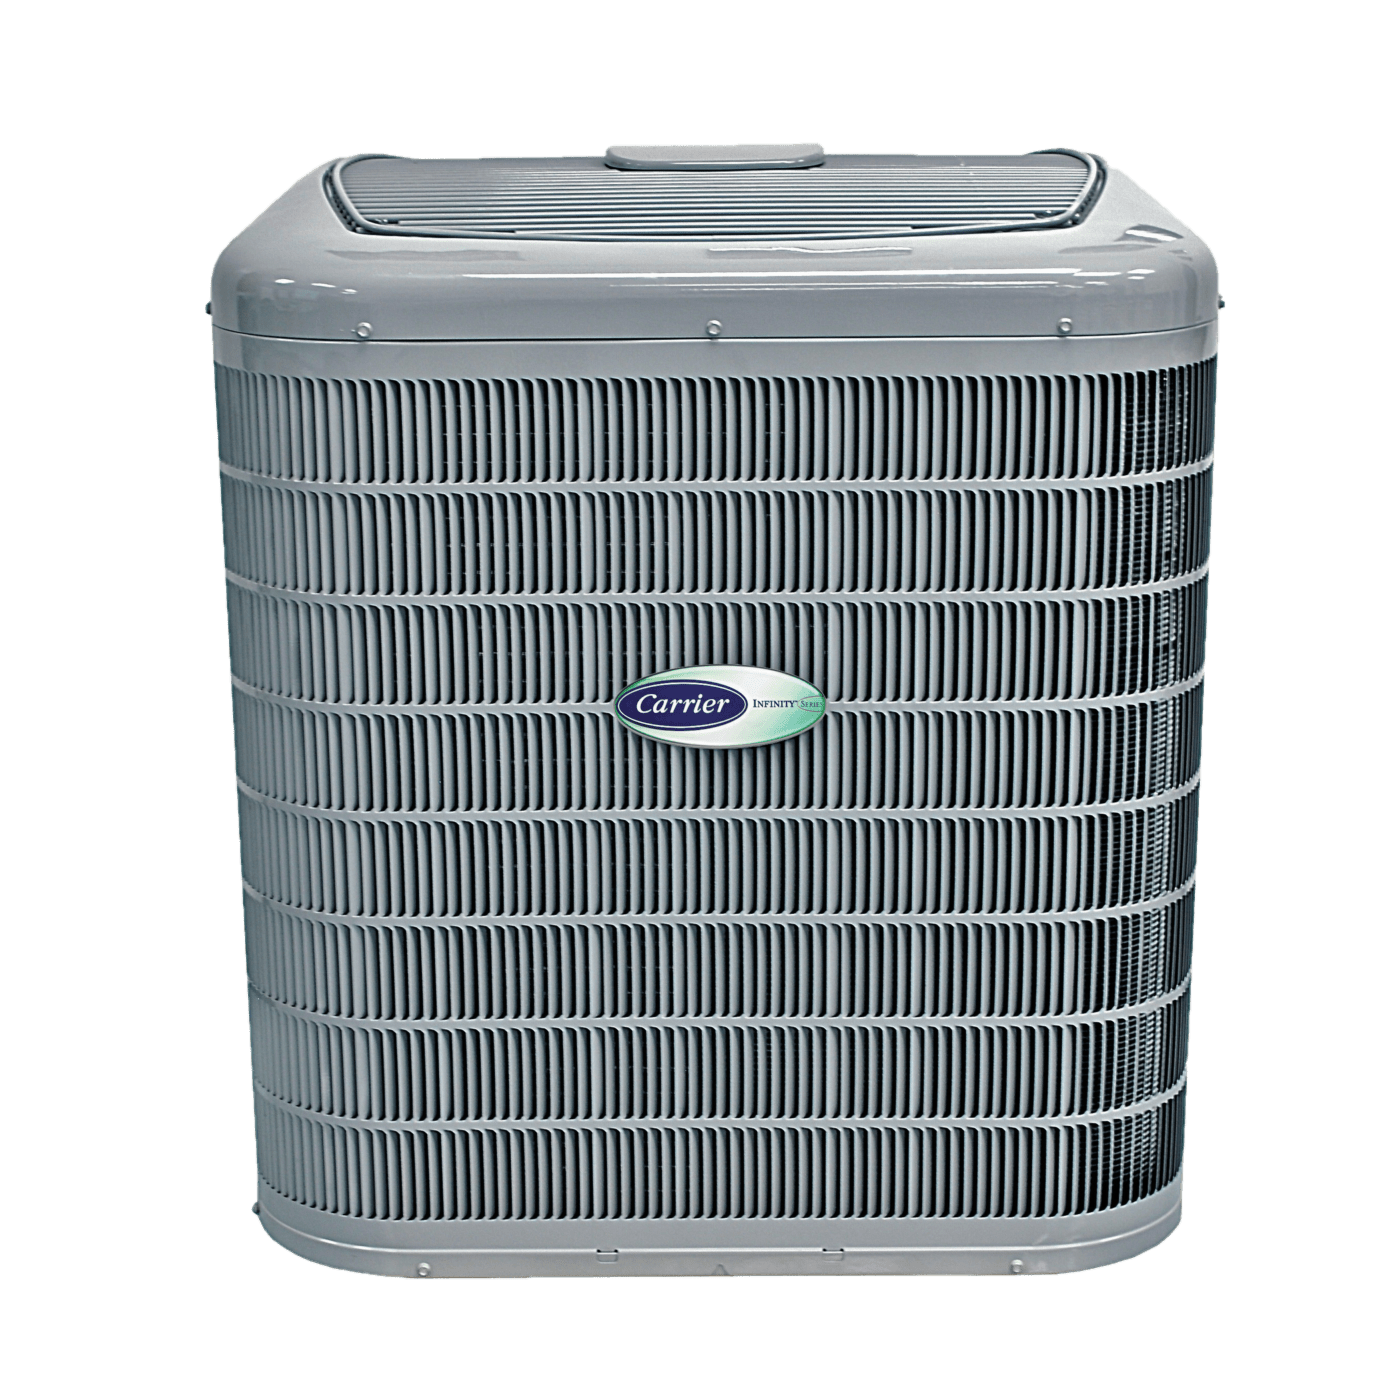 Heat Pumps Heat & Cool Your Home Carrier Residential